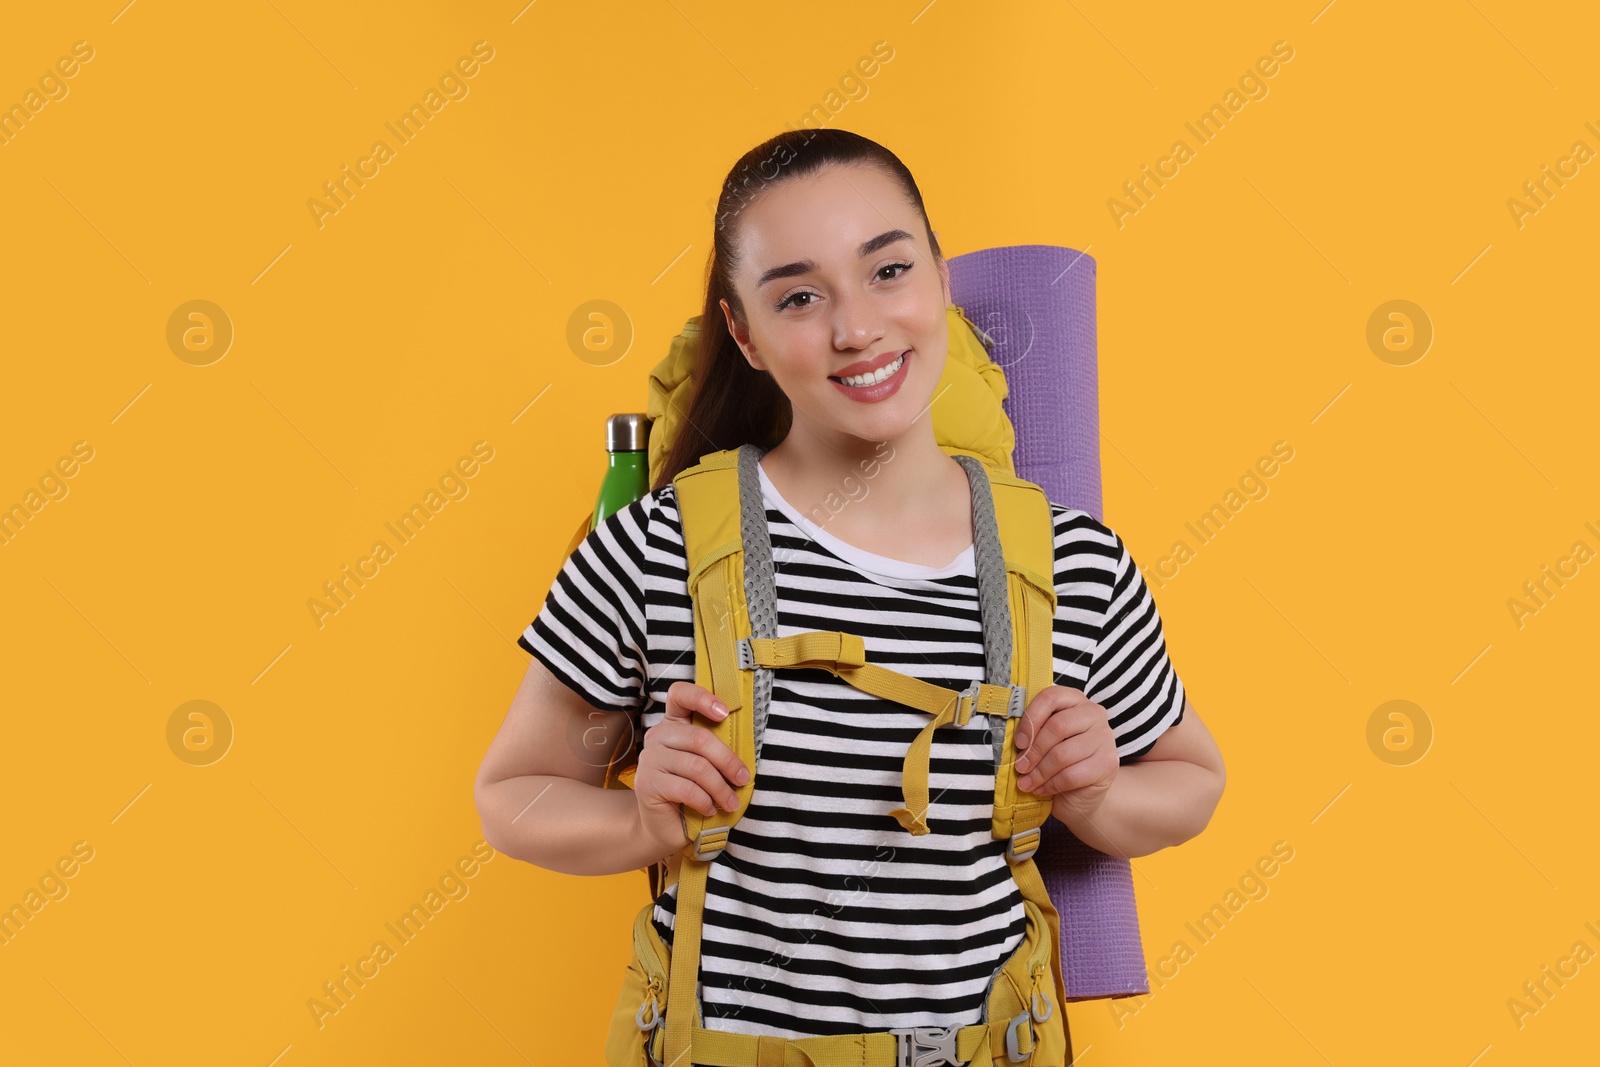 Photo of Smiling young woman with backpack on orange background. Active tourism